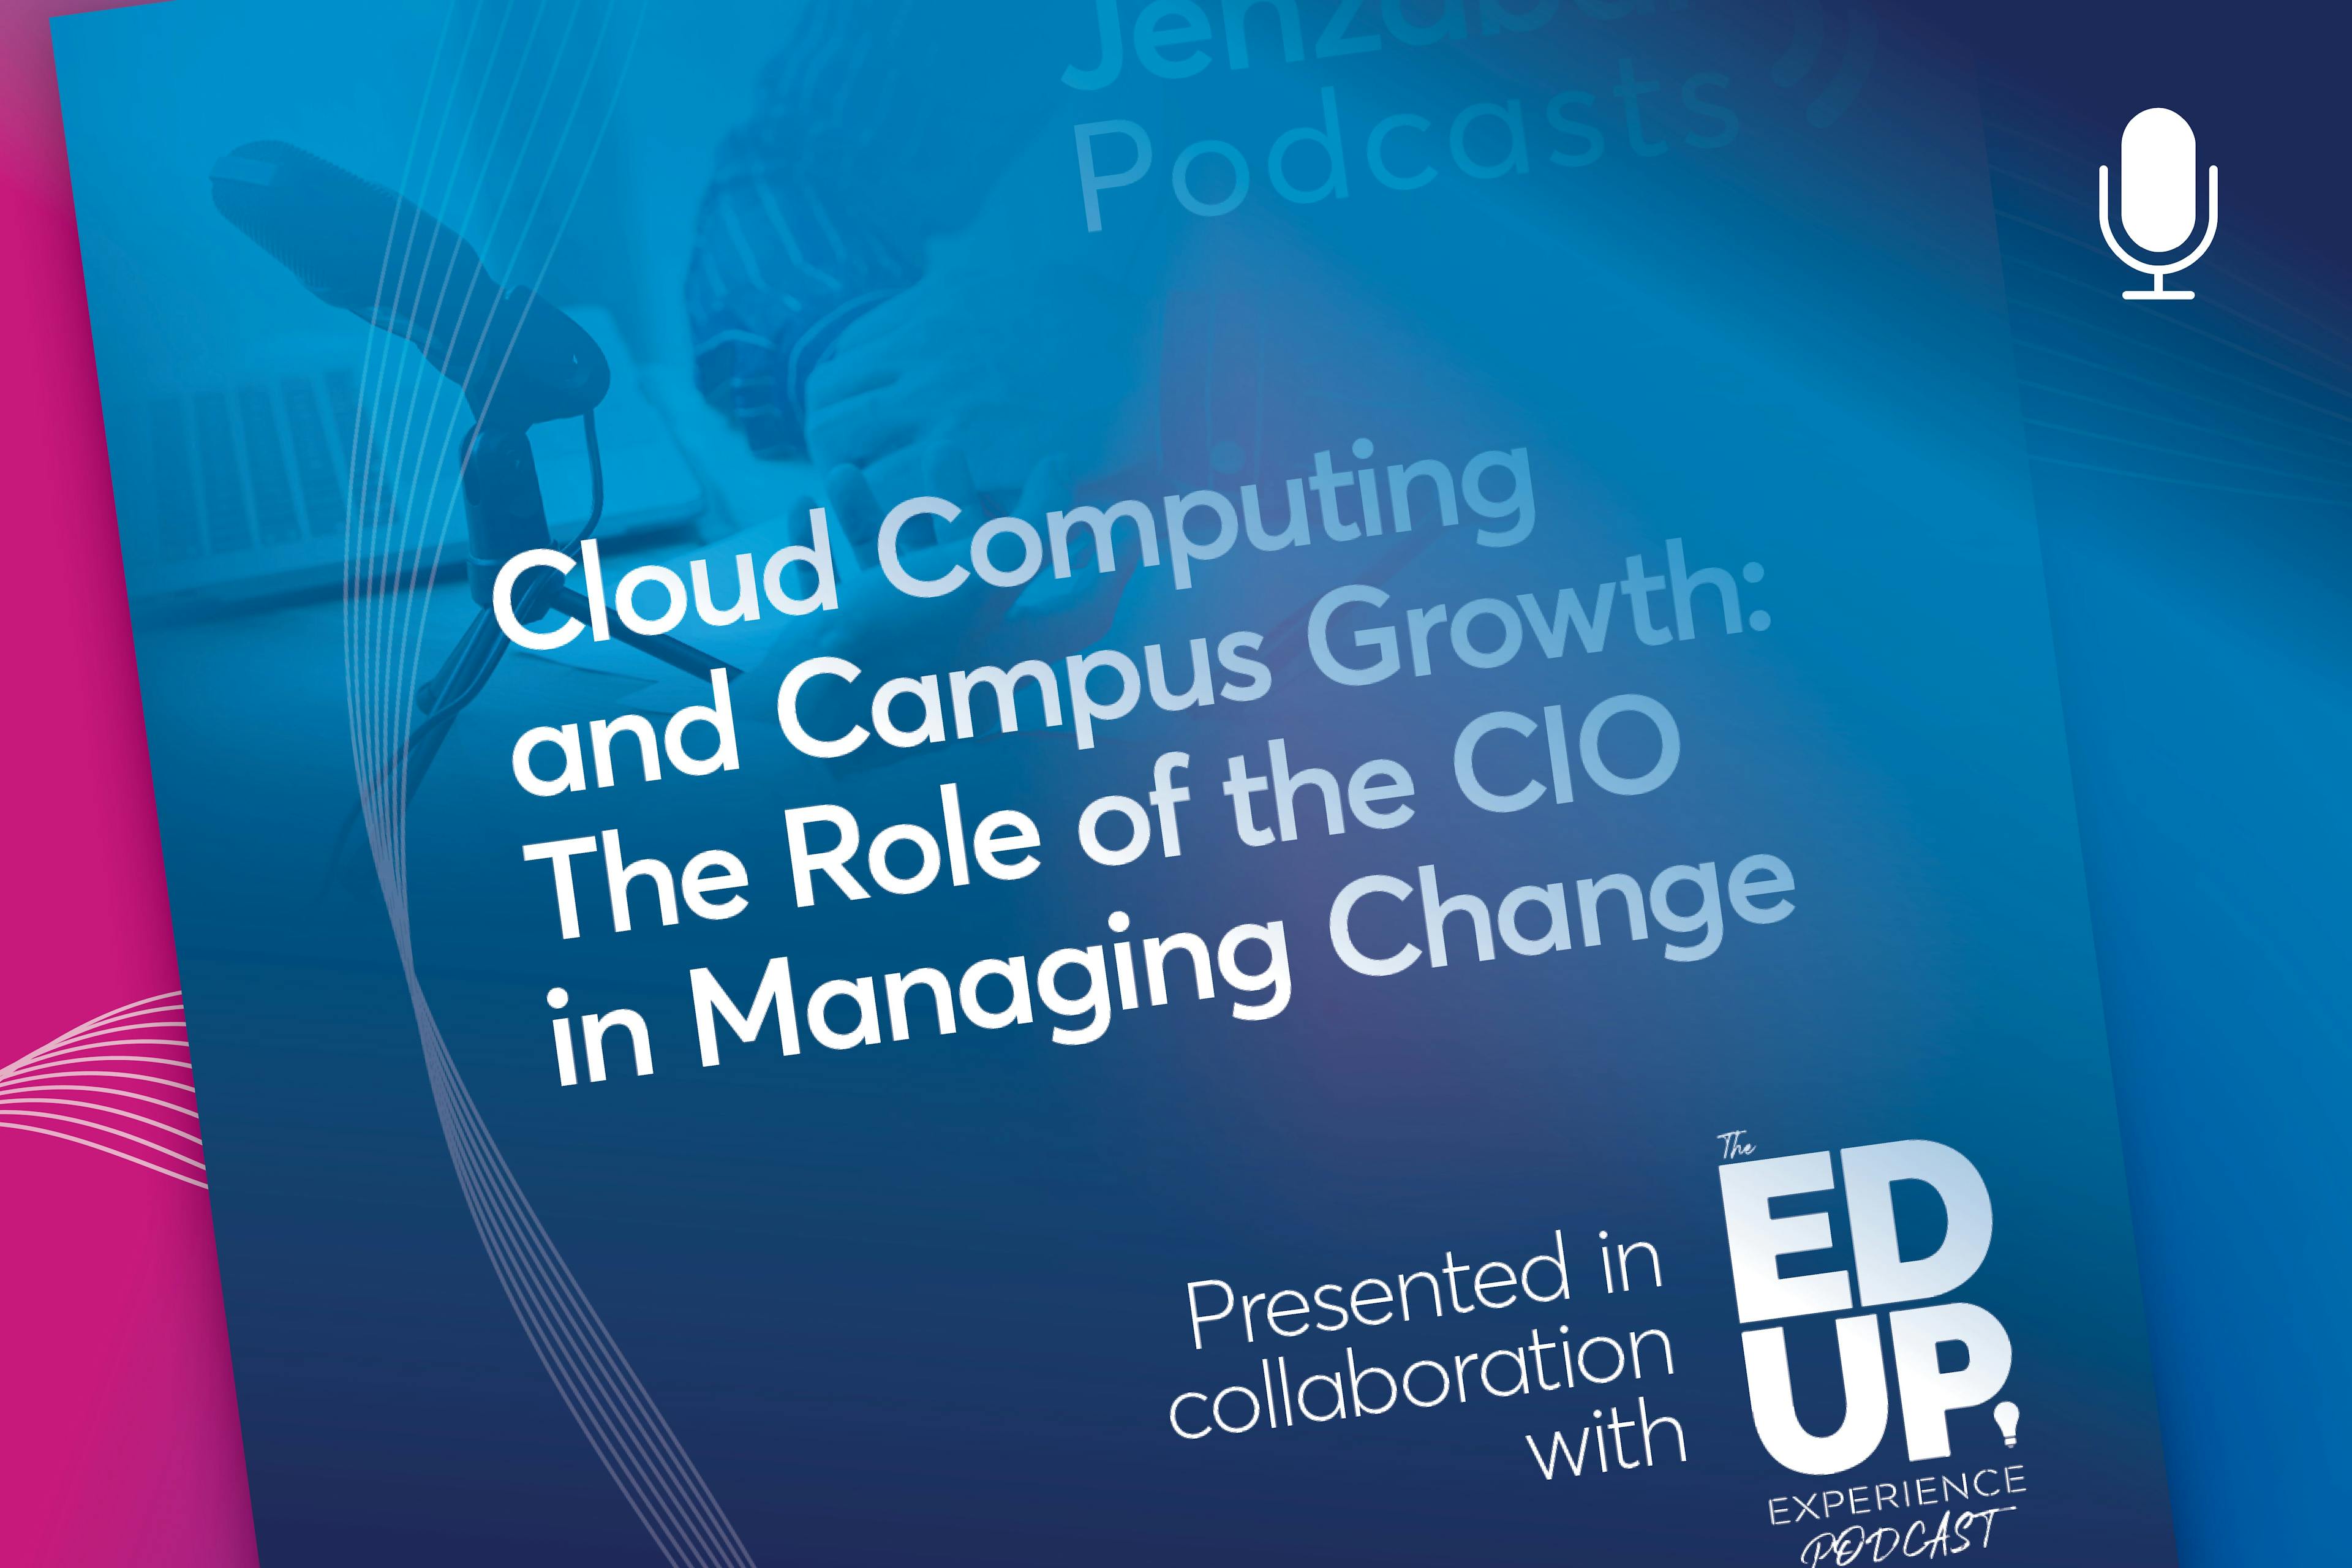 Cloud Computing and Campus Growth: The Role of the CIO in Managing Change